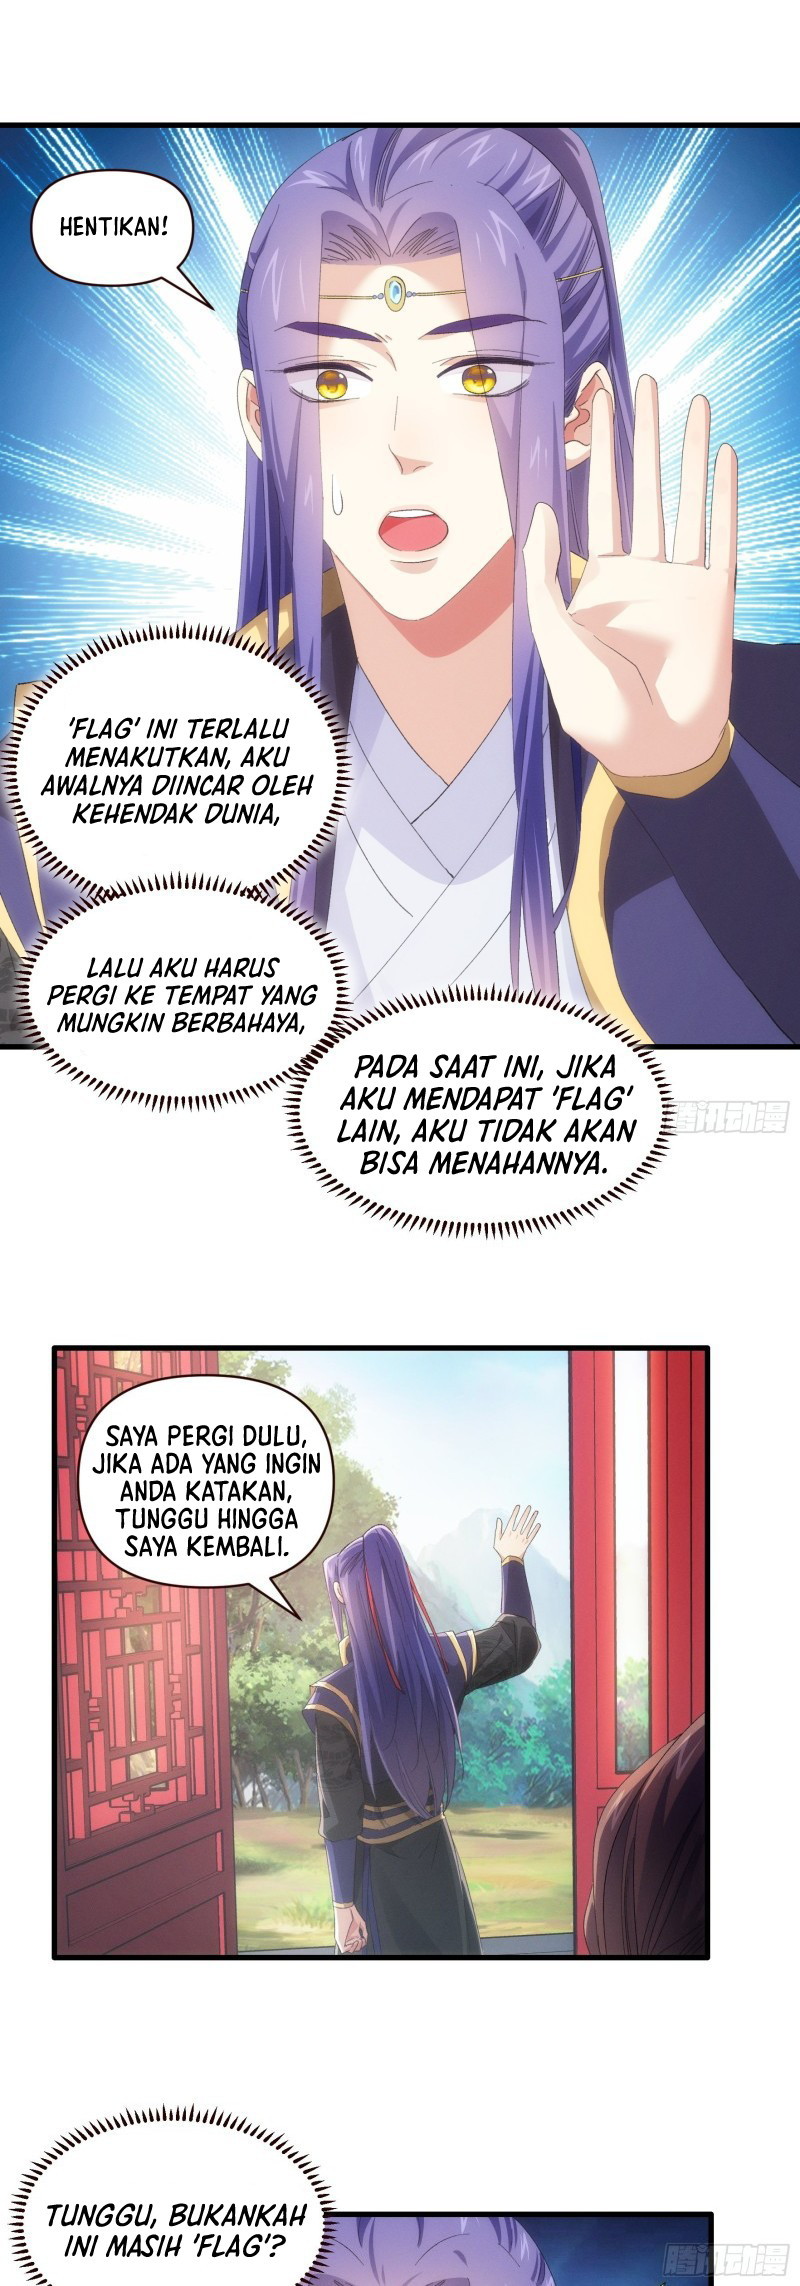 Dilarang COPAS - situs resmi www.mangacanblog.com - Komik i just dont play the card according to the routine 057 - chapter 57 58 Indonesia i just dont play the card according to the routine 057 - chapter 57 Terbaru 19|Baca Manga Komik Indonesia|Mangacan